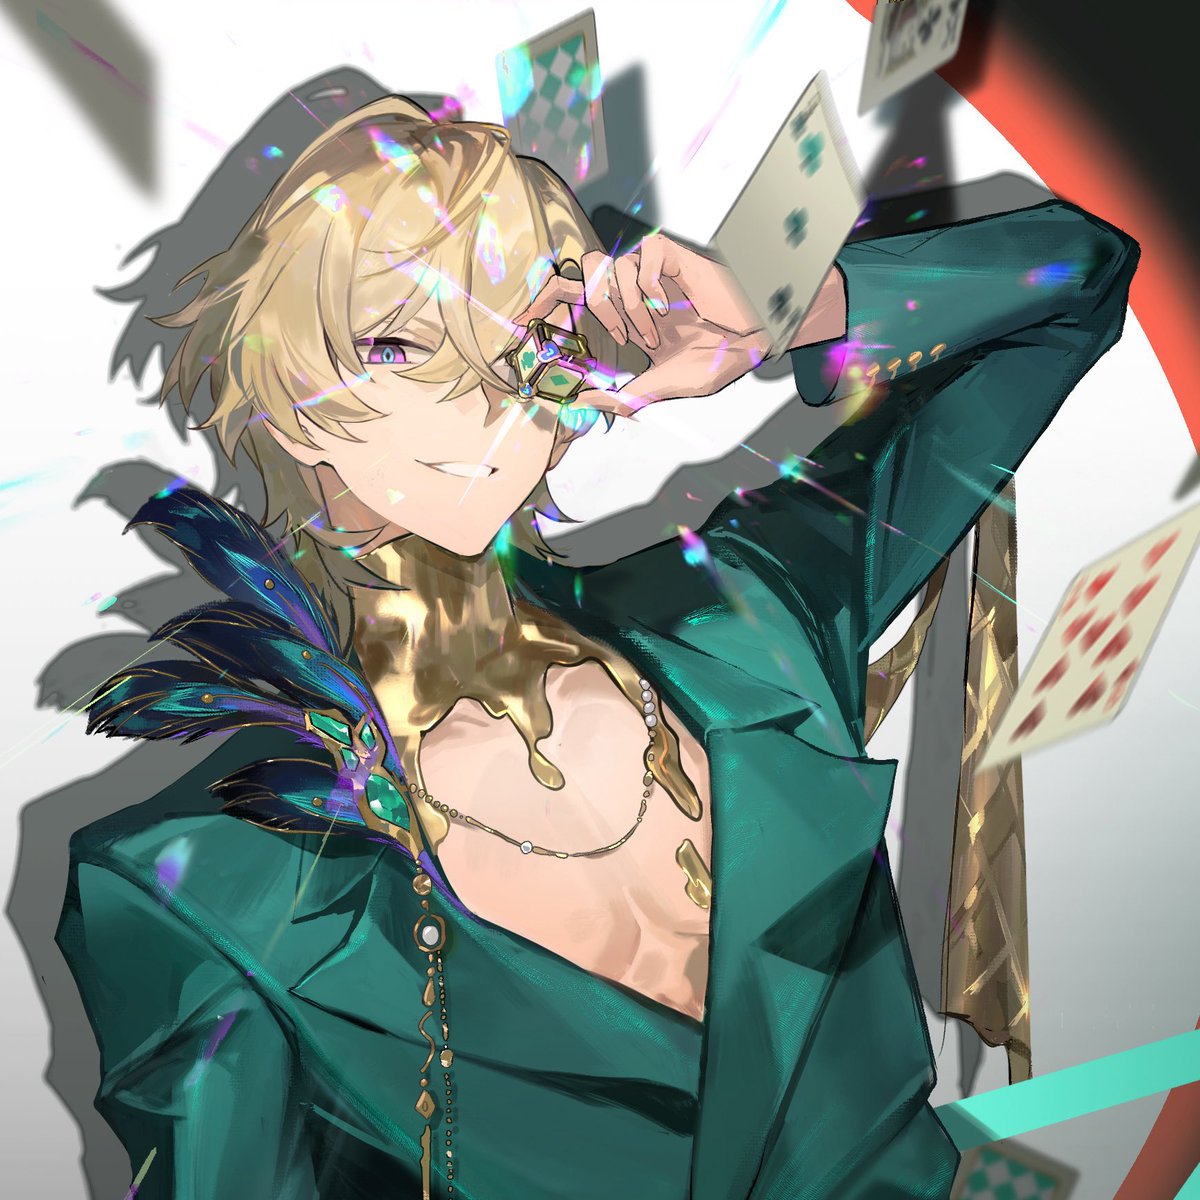 AVENTURINE…. THE GOLD DRIPPING DOWN HIS CHEST HELLO ??